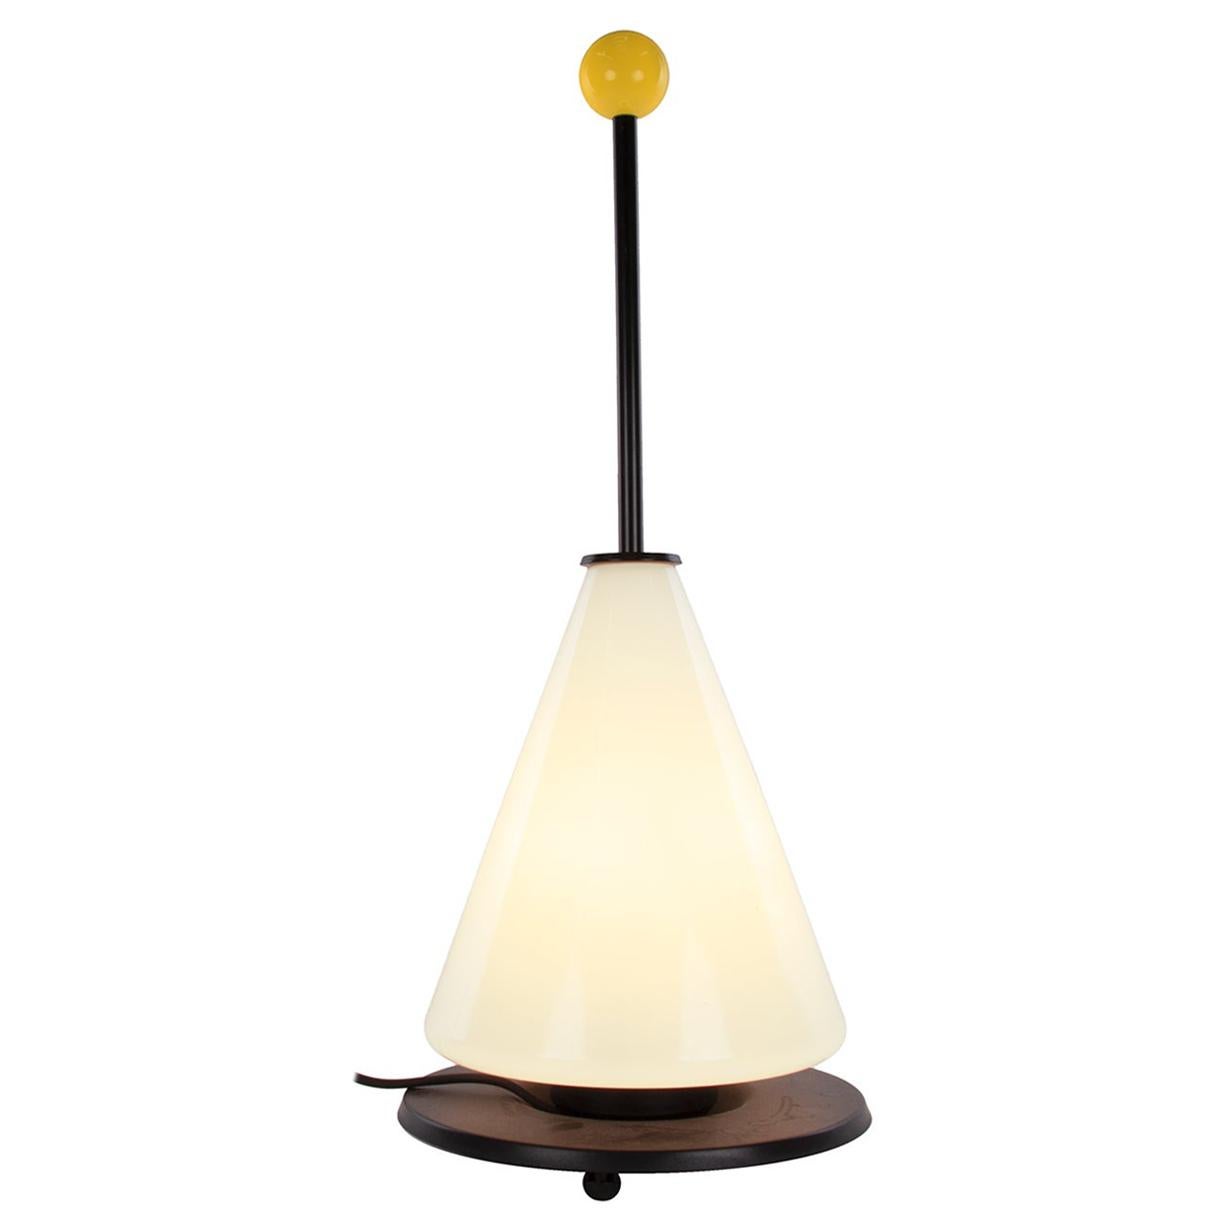 Memphis Style Standby Lucite Lamp Germany, 1990s For Sale